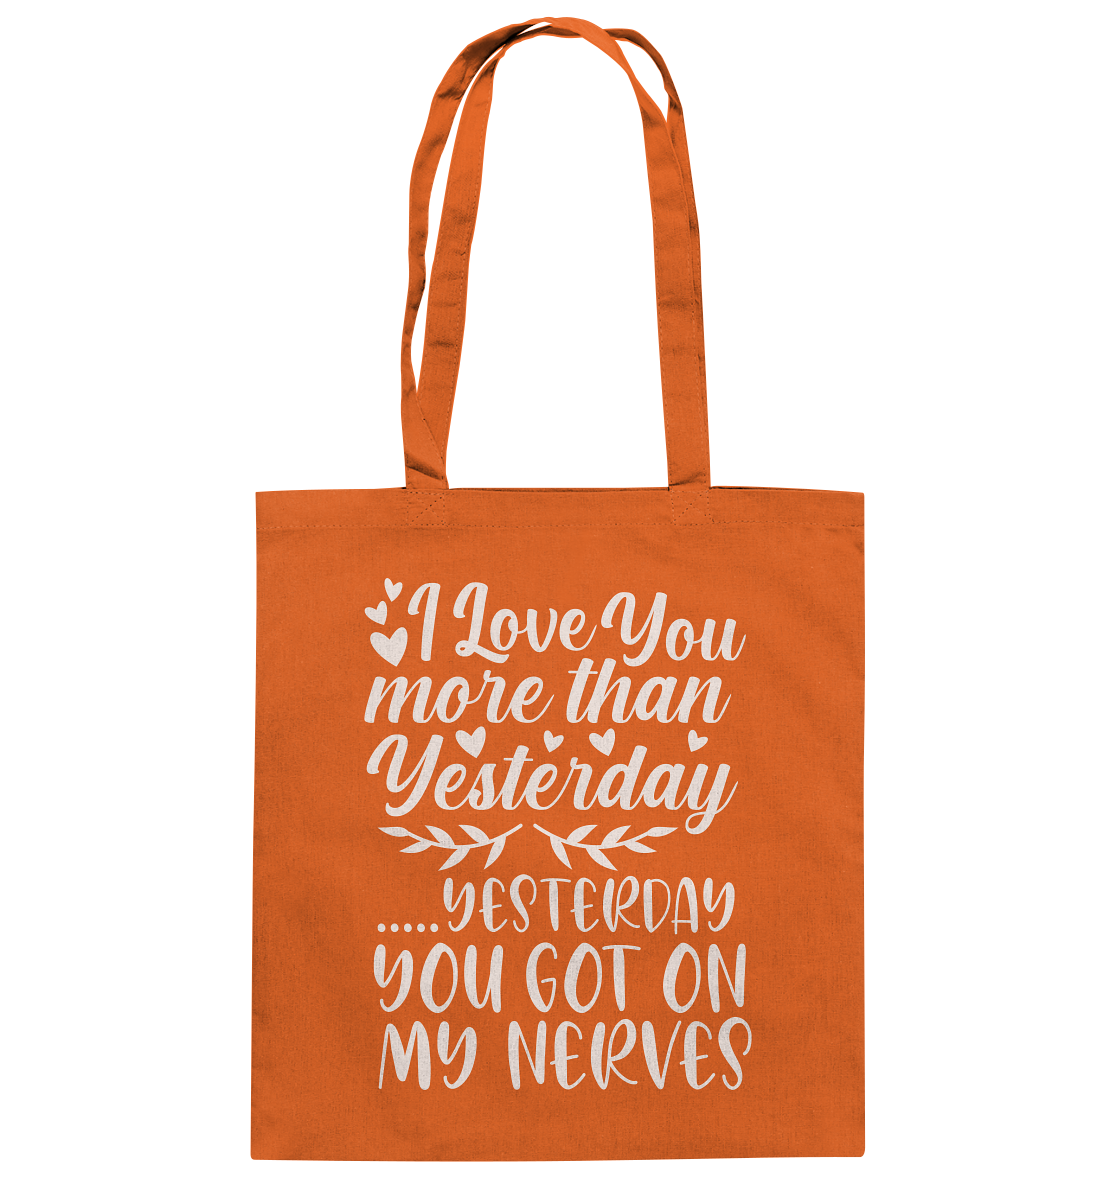 I love you more than yesterday - cotton bag